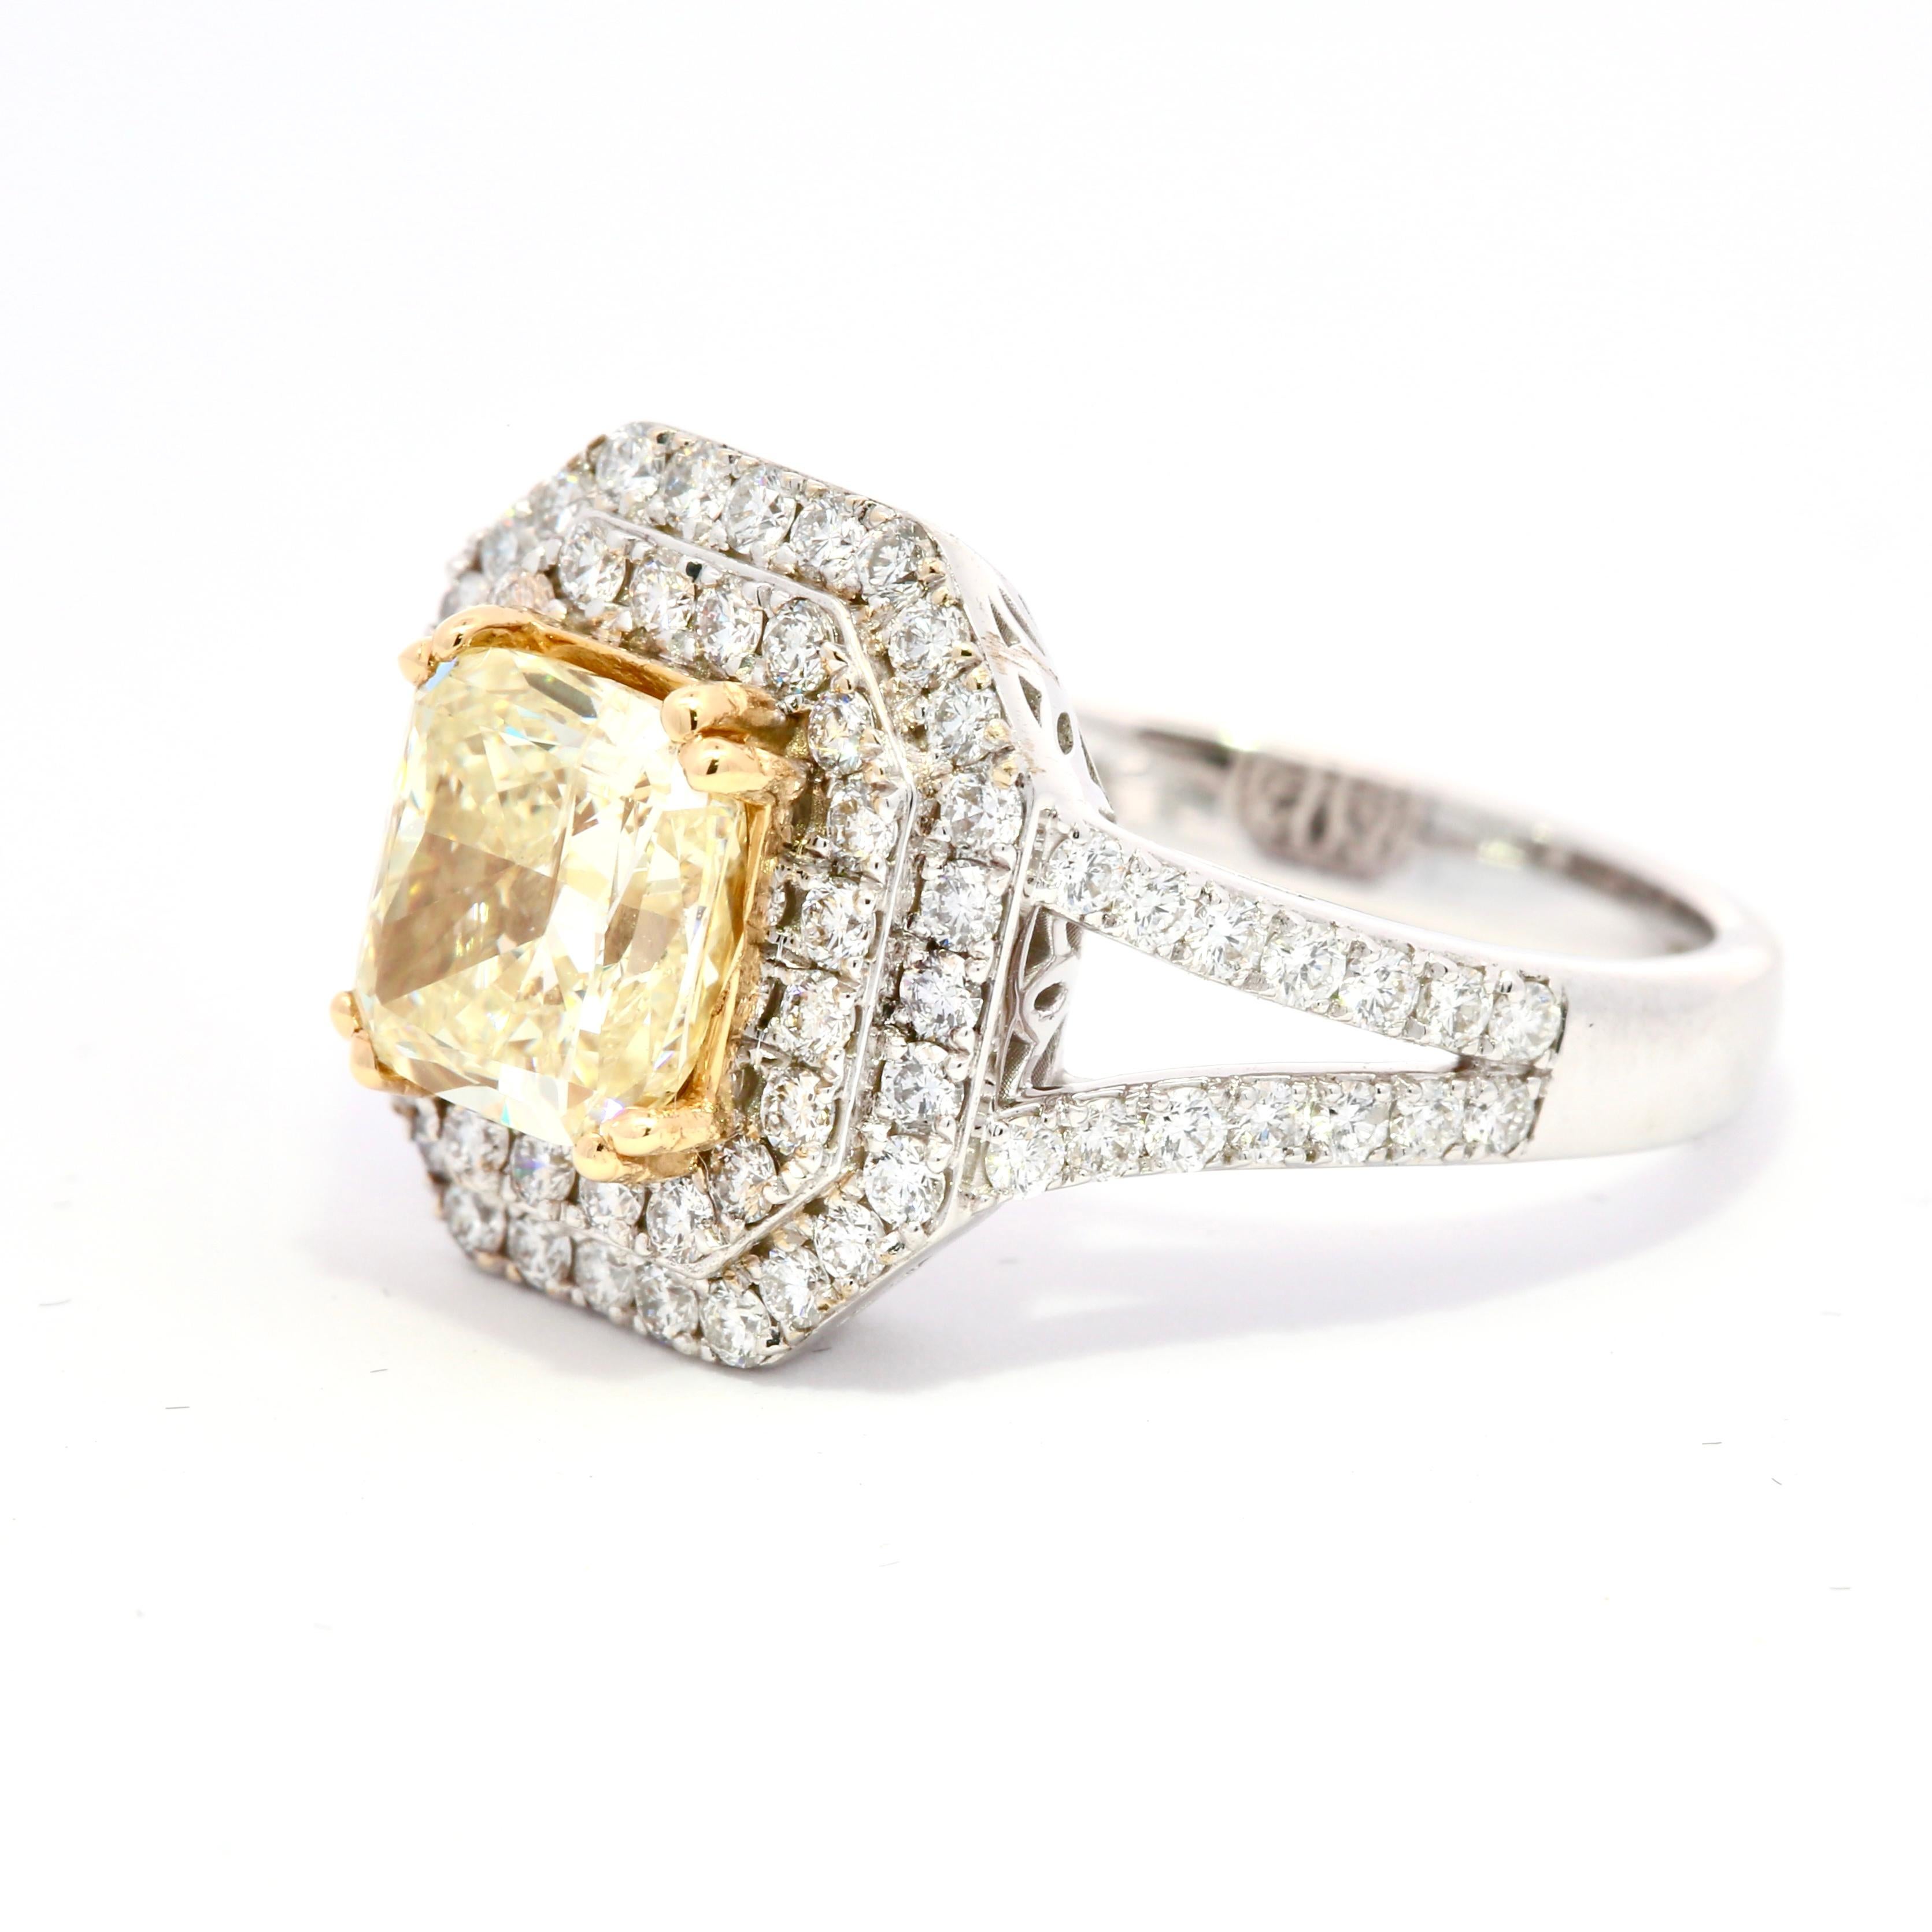 IGI Certified - 2.13 Carats Fancy Yellow Diamond Ring For Sale 1